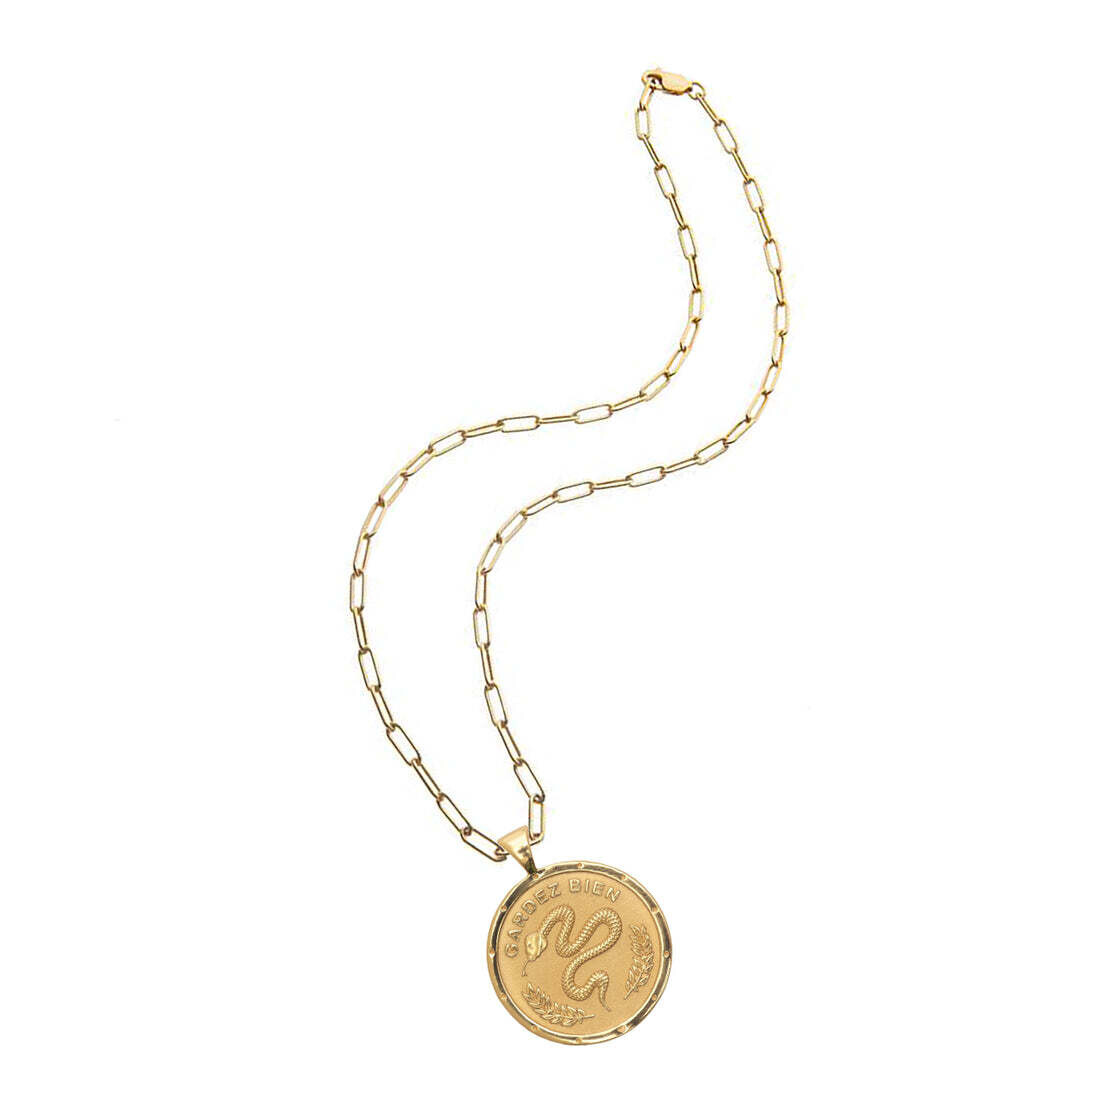 Jane Win Original PROTECT Coin Pendant with Drawn Link Chain